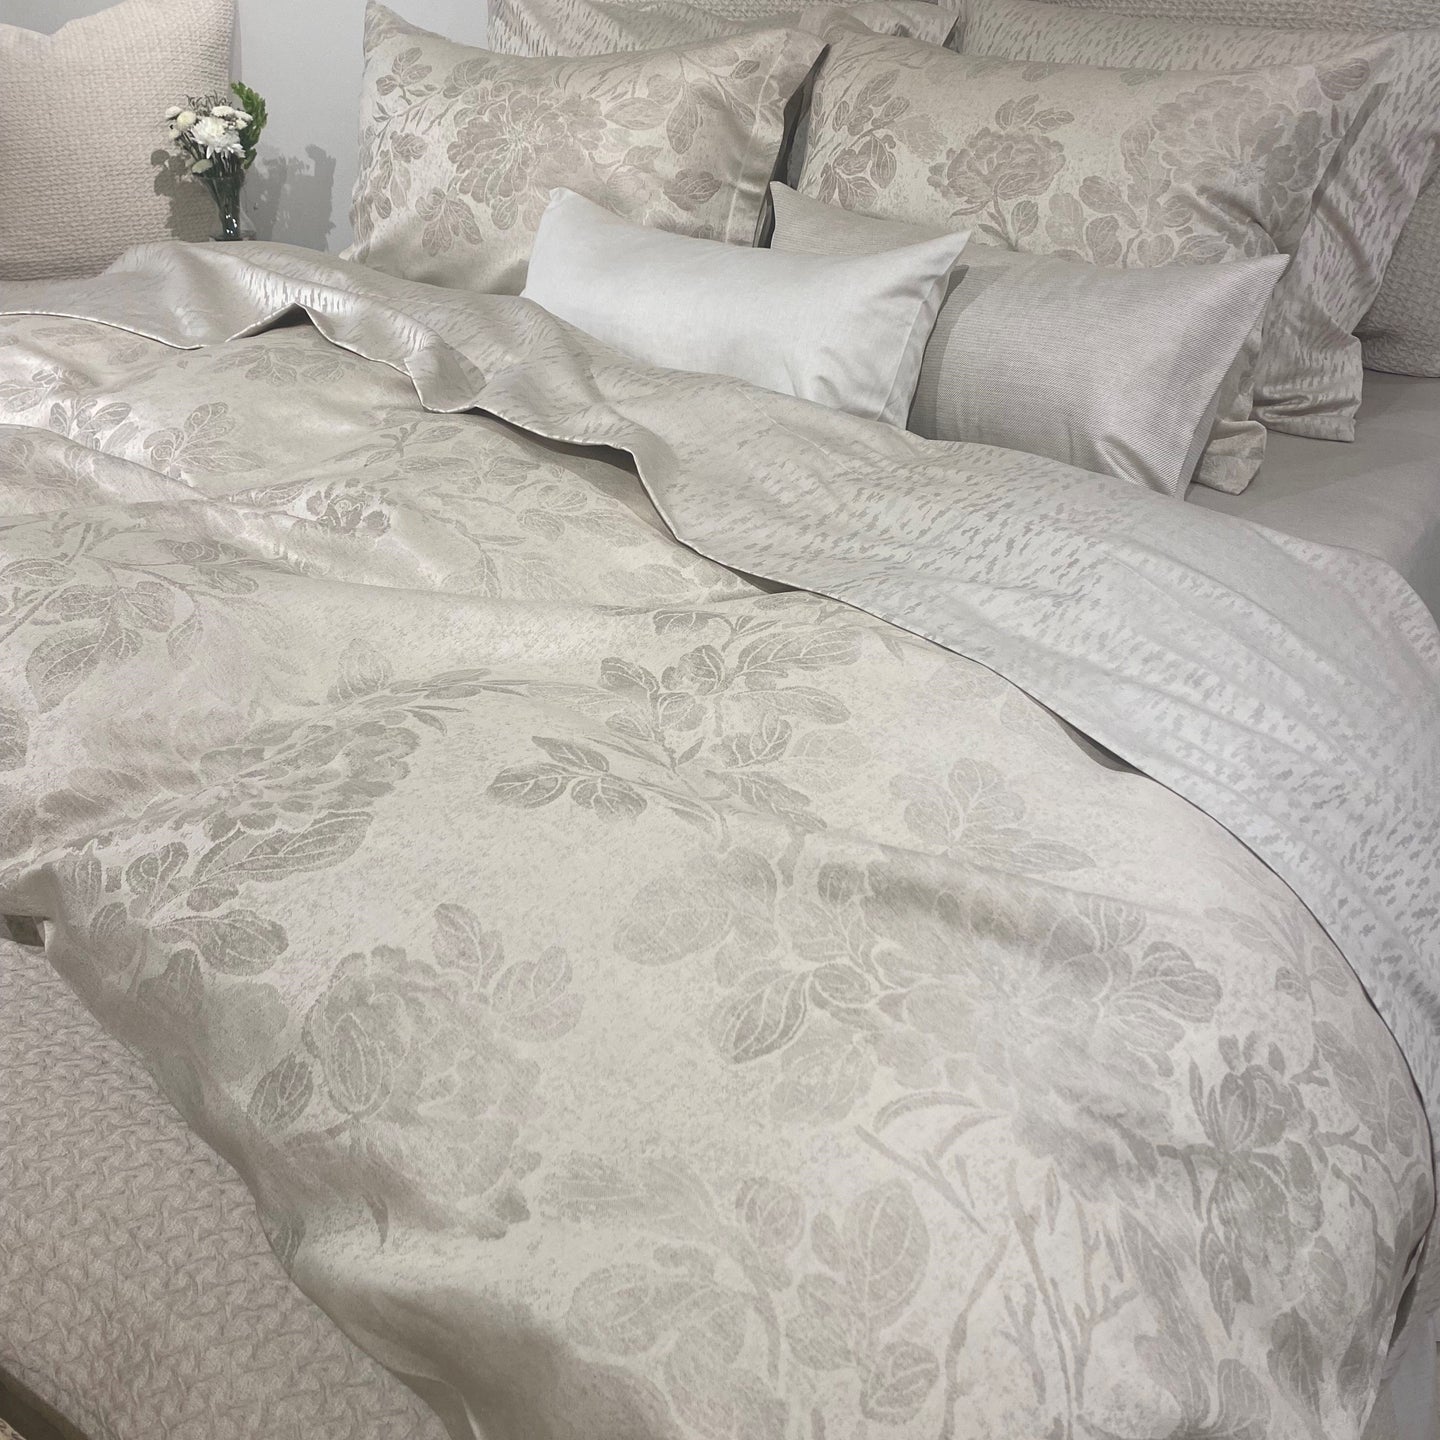 Josephine by The Purists Duvet Covers